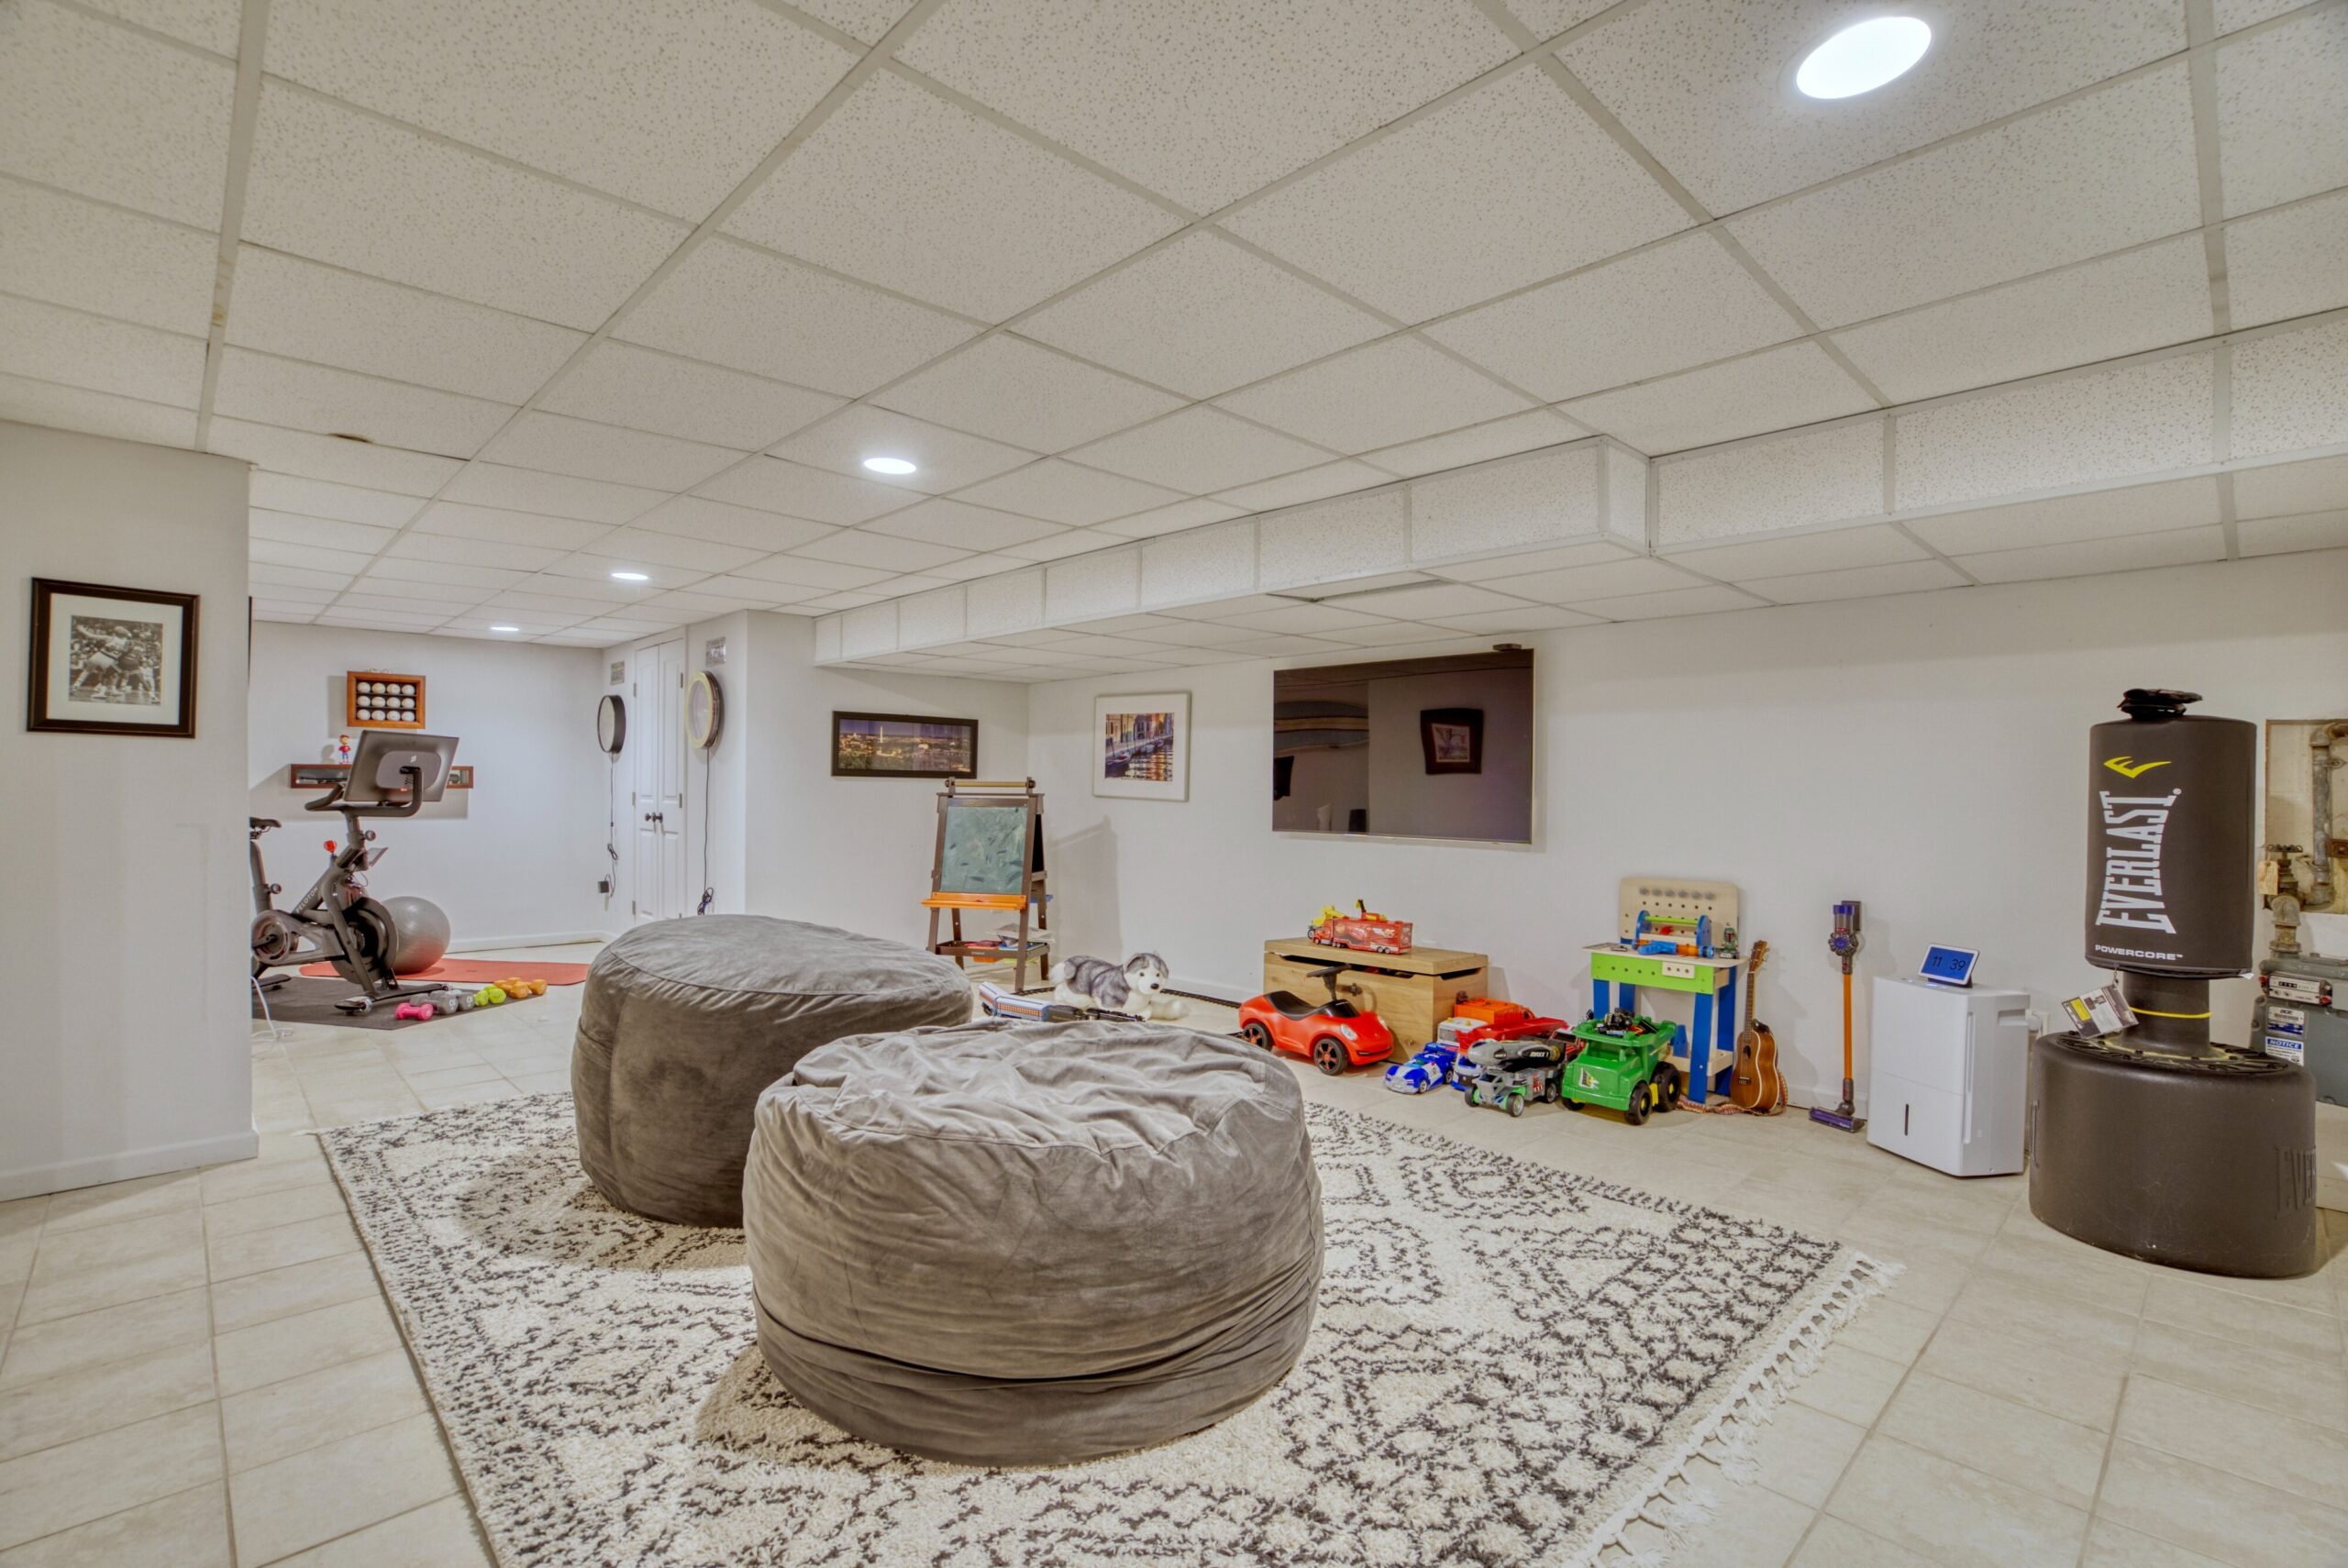 Professional interior photo of 209 Norwood Road, Annapolis, MD - showing the basement rec-room with tile floors, ceiling tiles, area rug and various children's toys and workout equipment